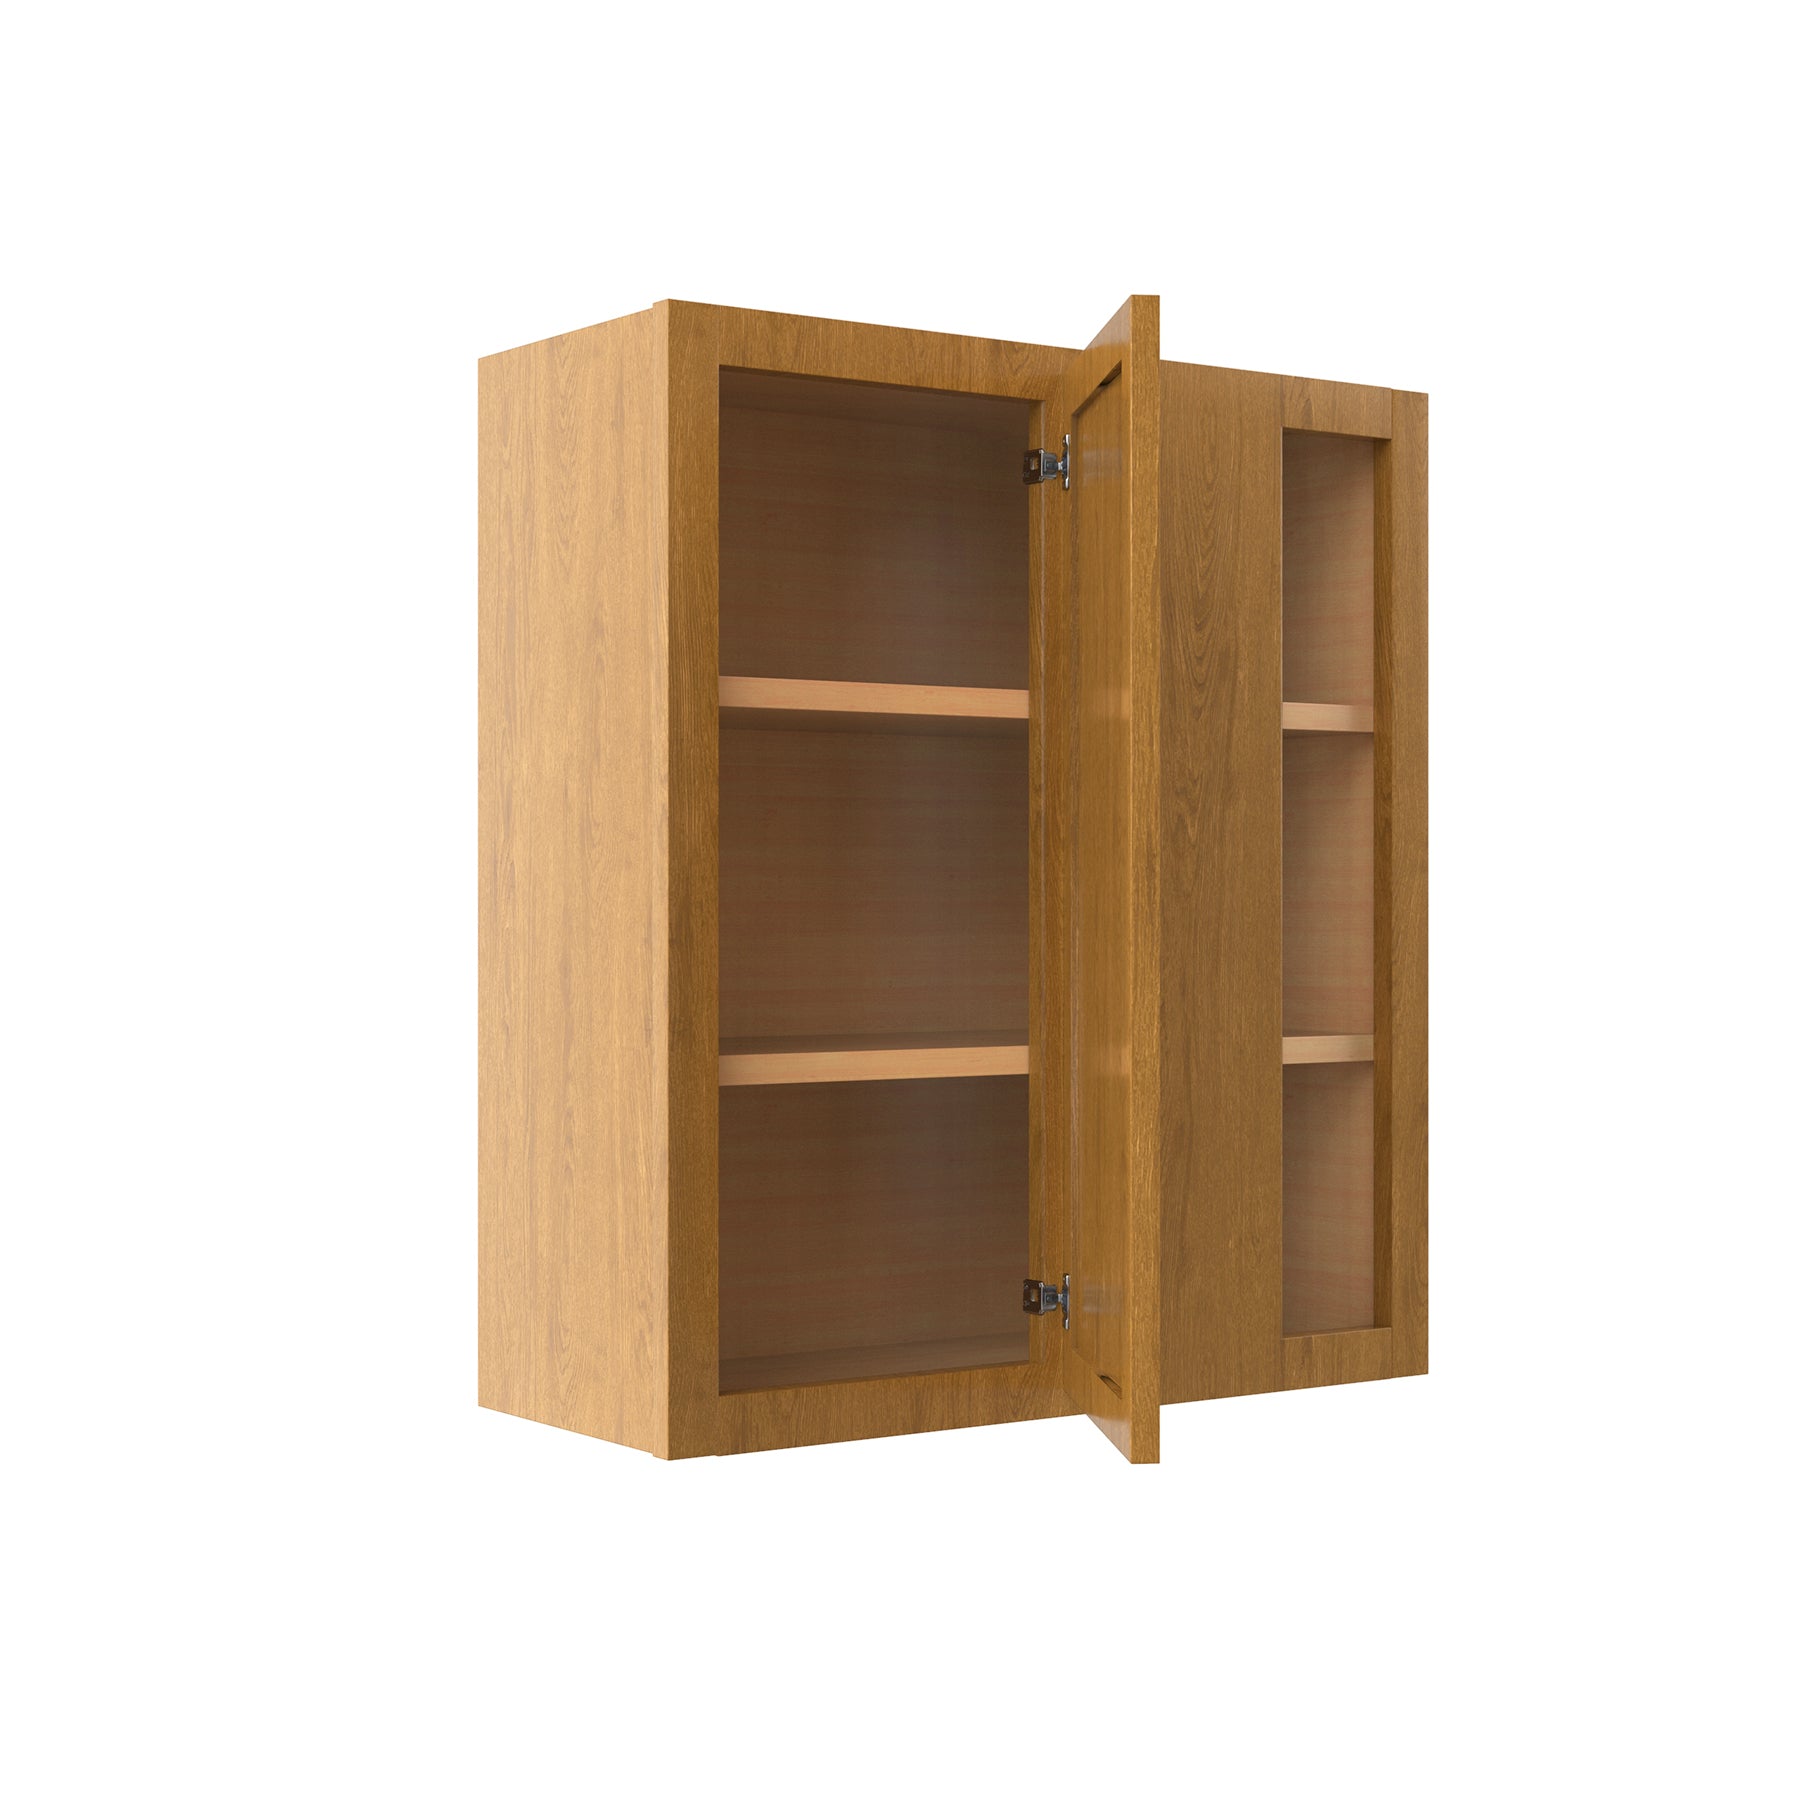 RTA - Country Oak - Blind Wall Cabinet | 27"W x 30"H x 12"D